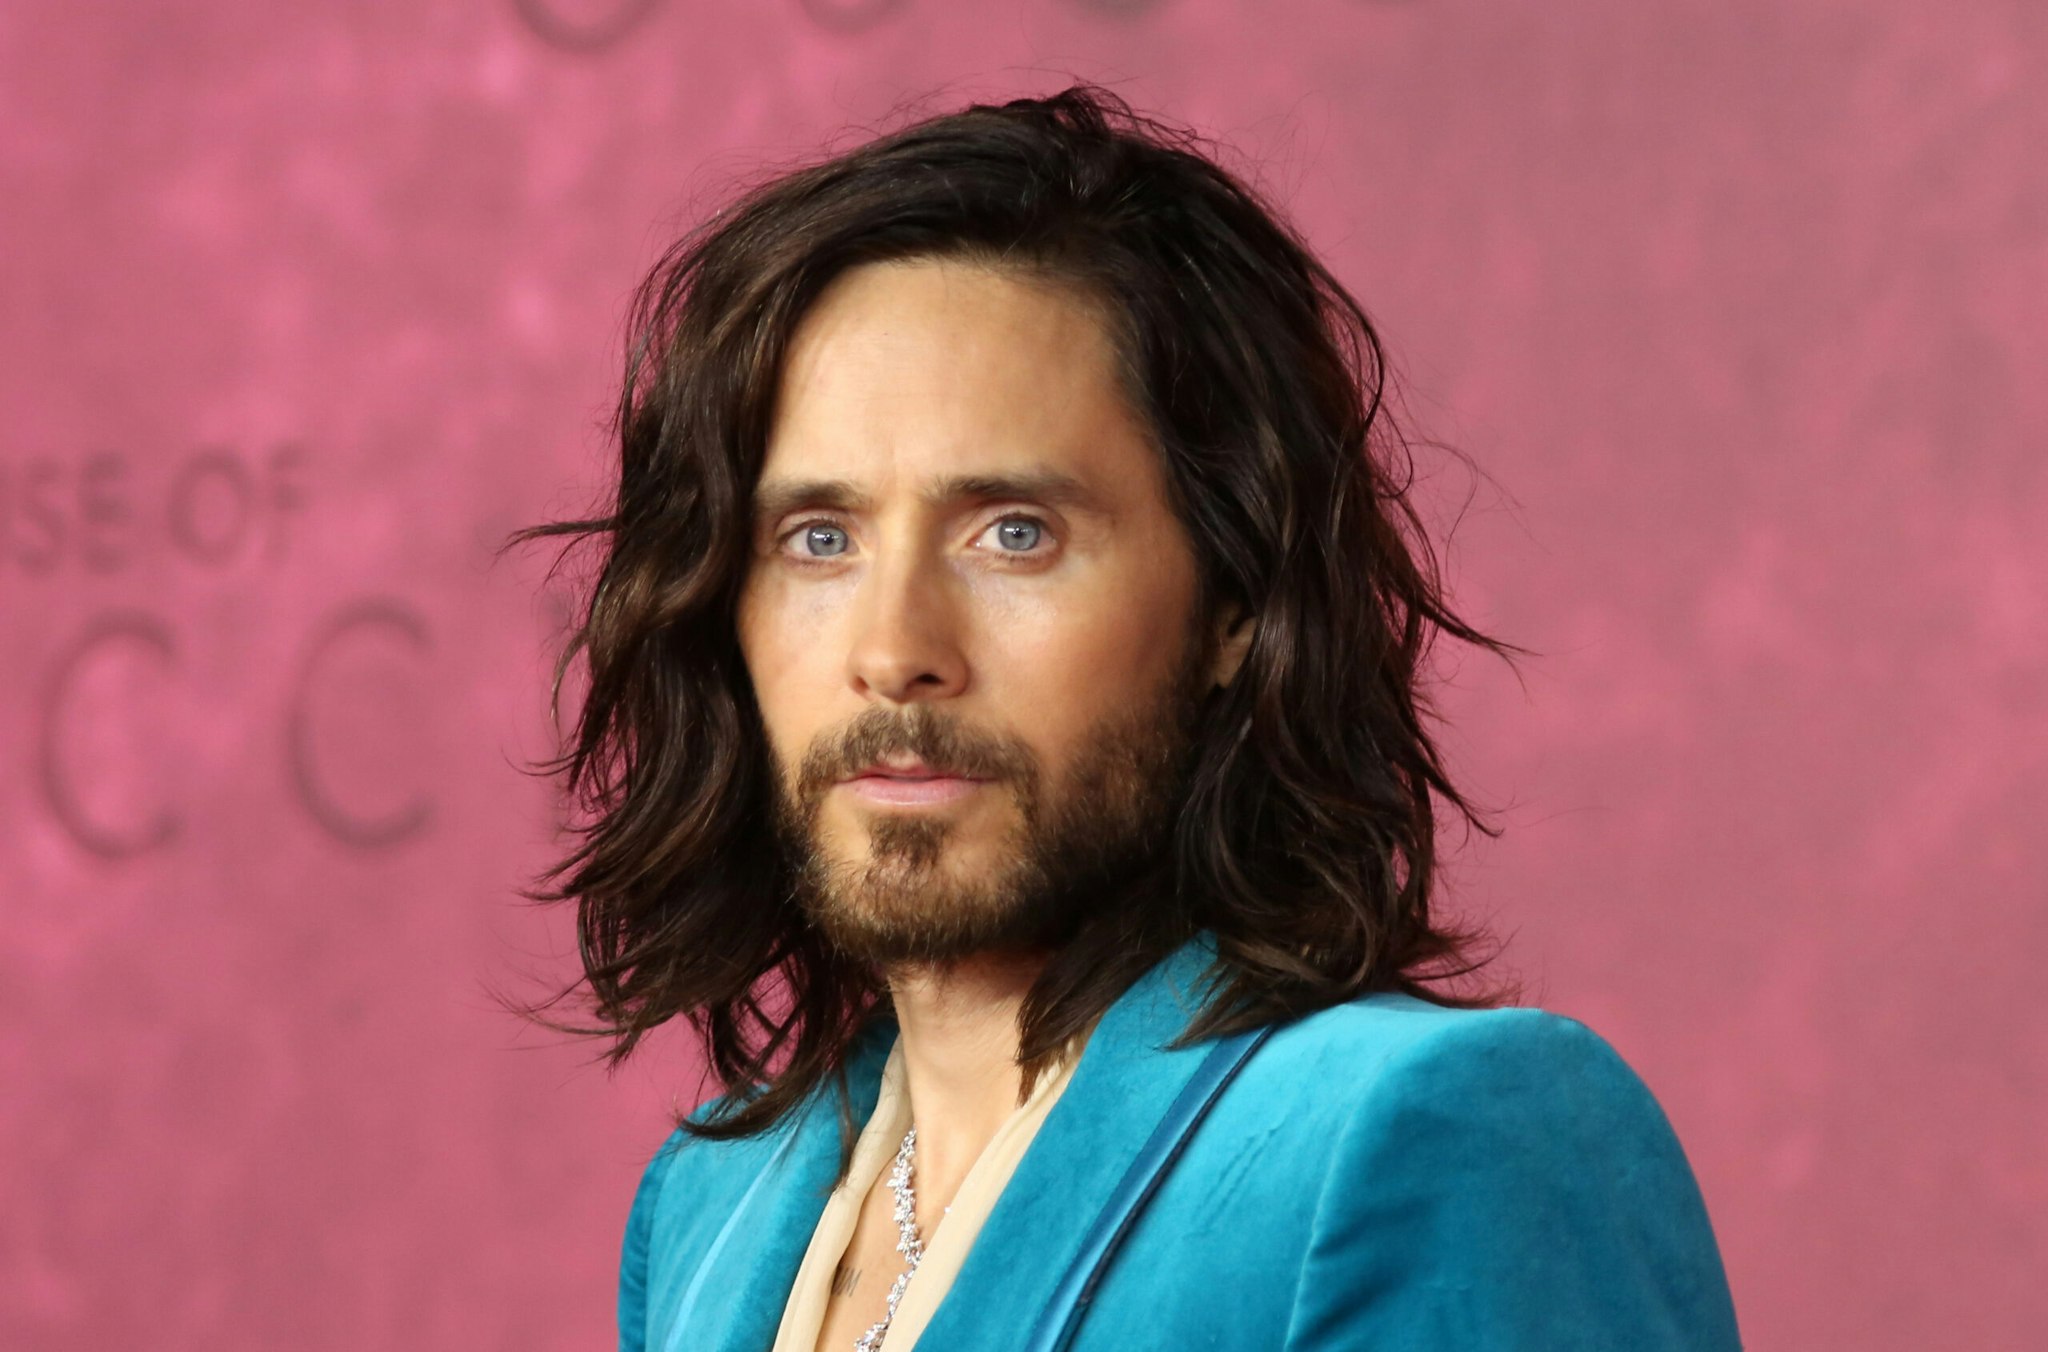 Jared Leto On Excessive Drug Use: ‘I Took It For A Ride And Then It ...